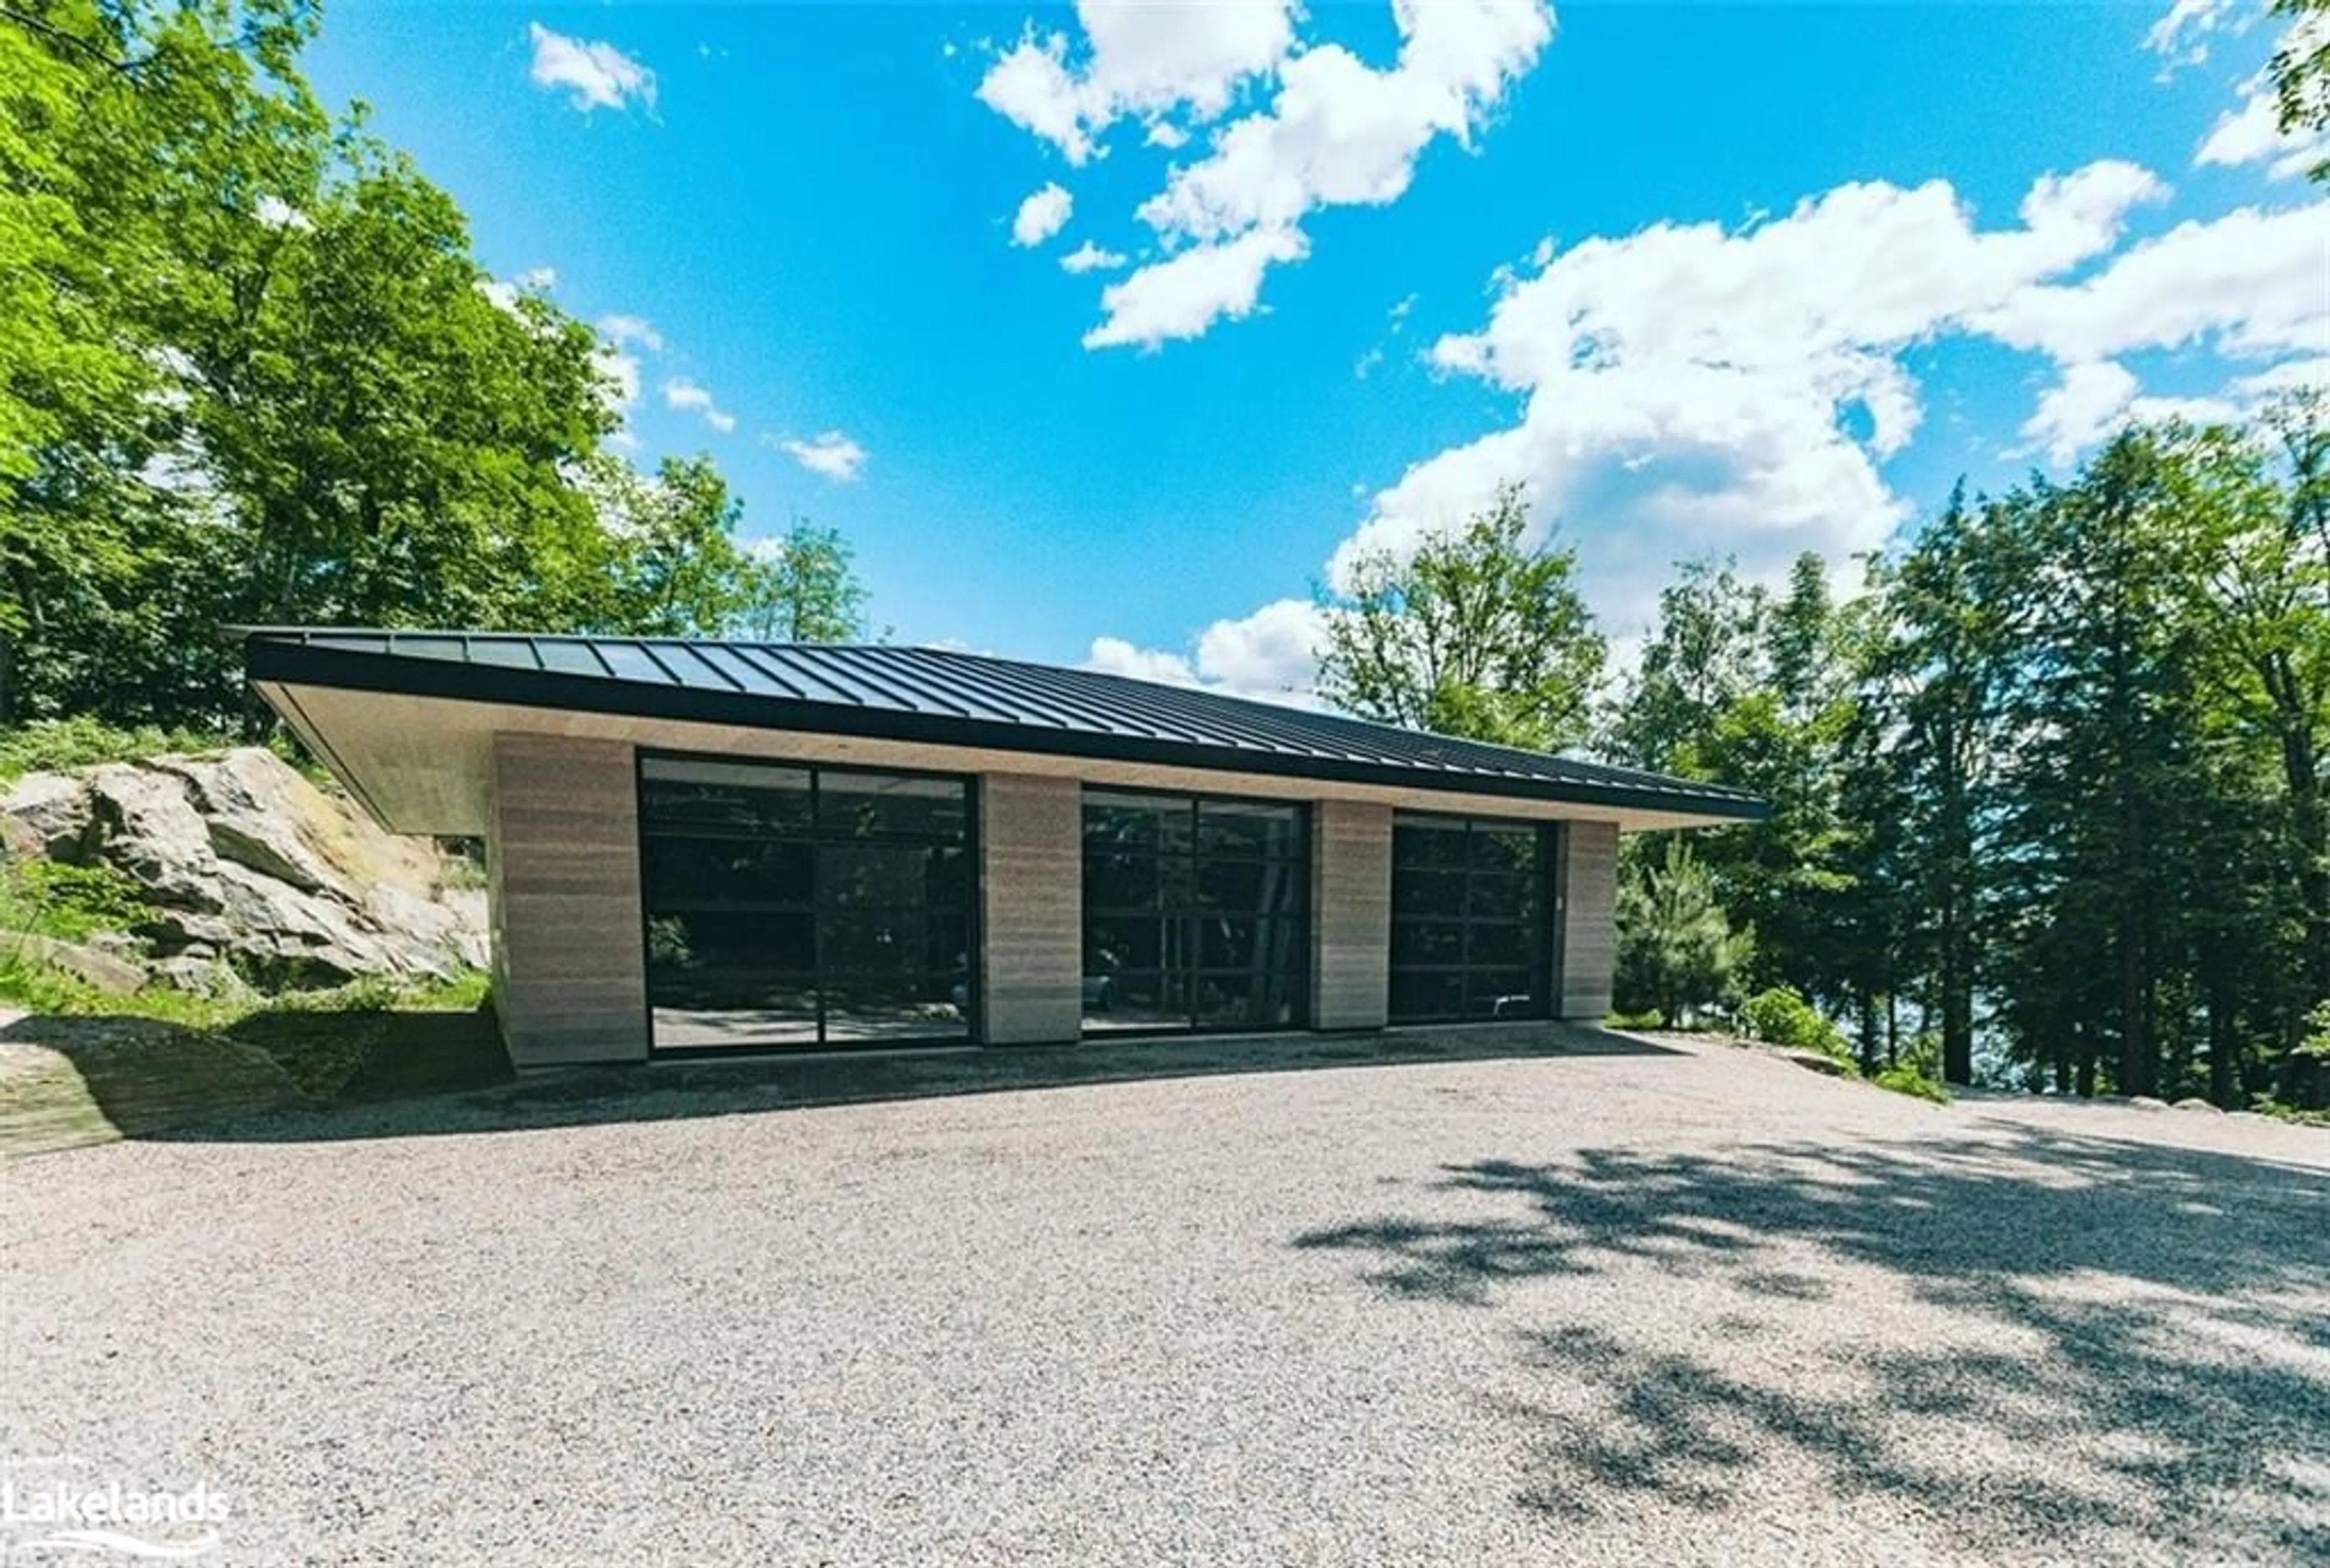 Outside view for 1737 Peninsula Rd, Port Carling Ontario P0B 1J0